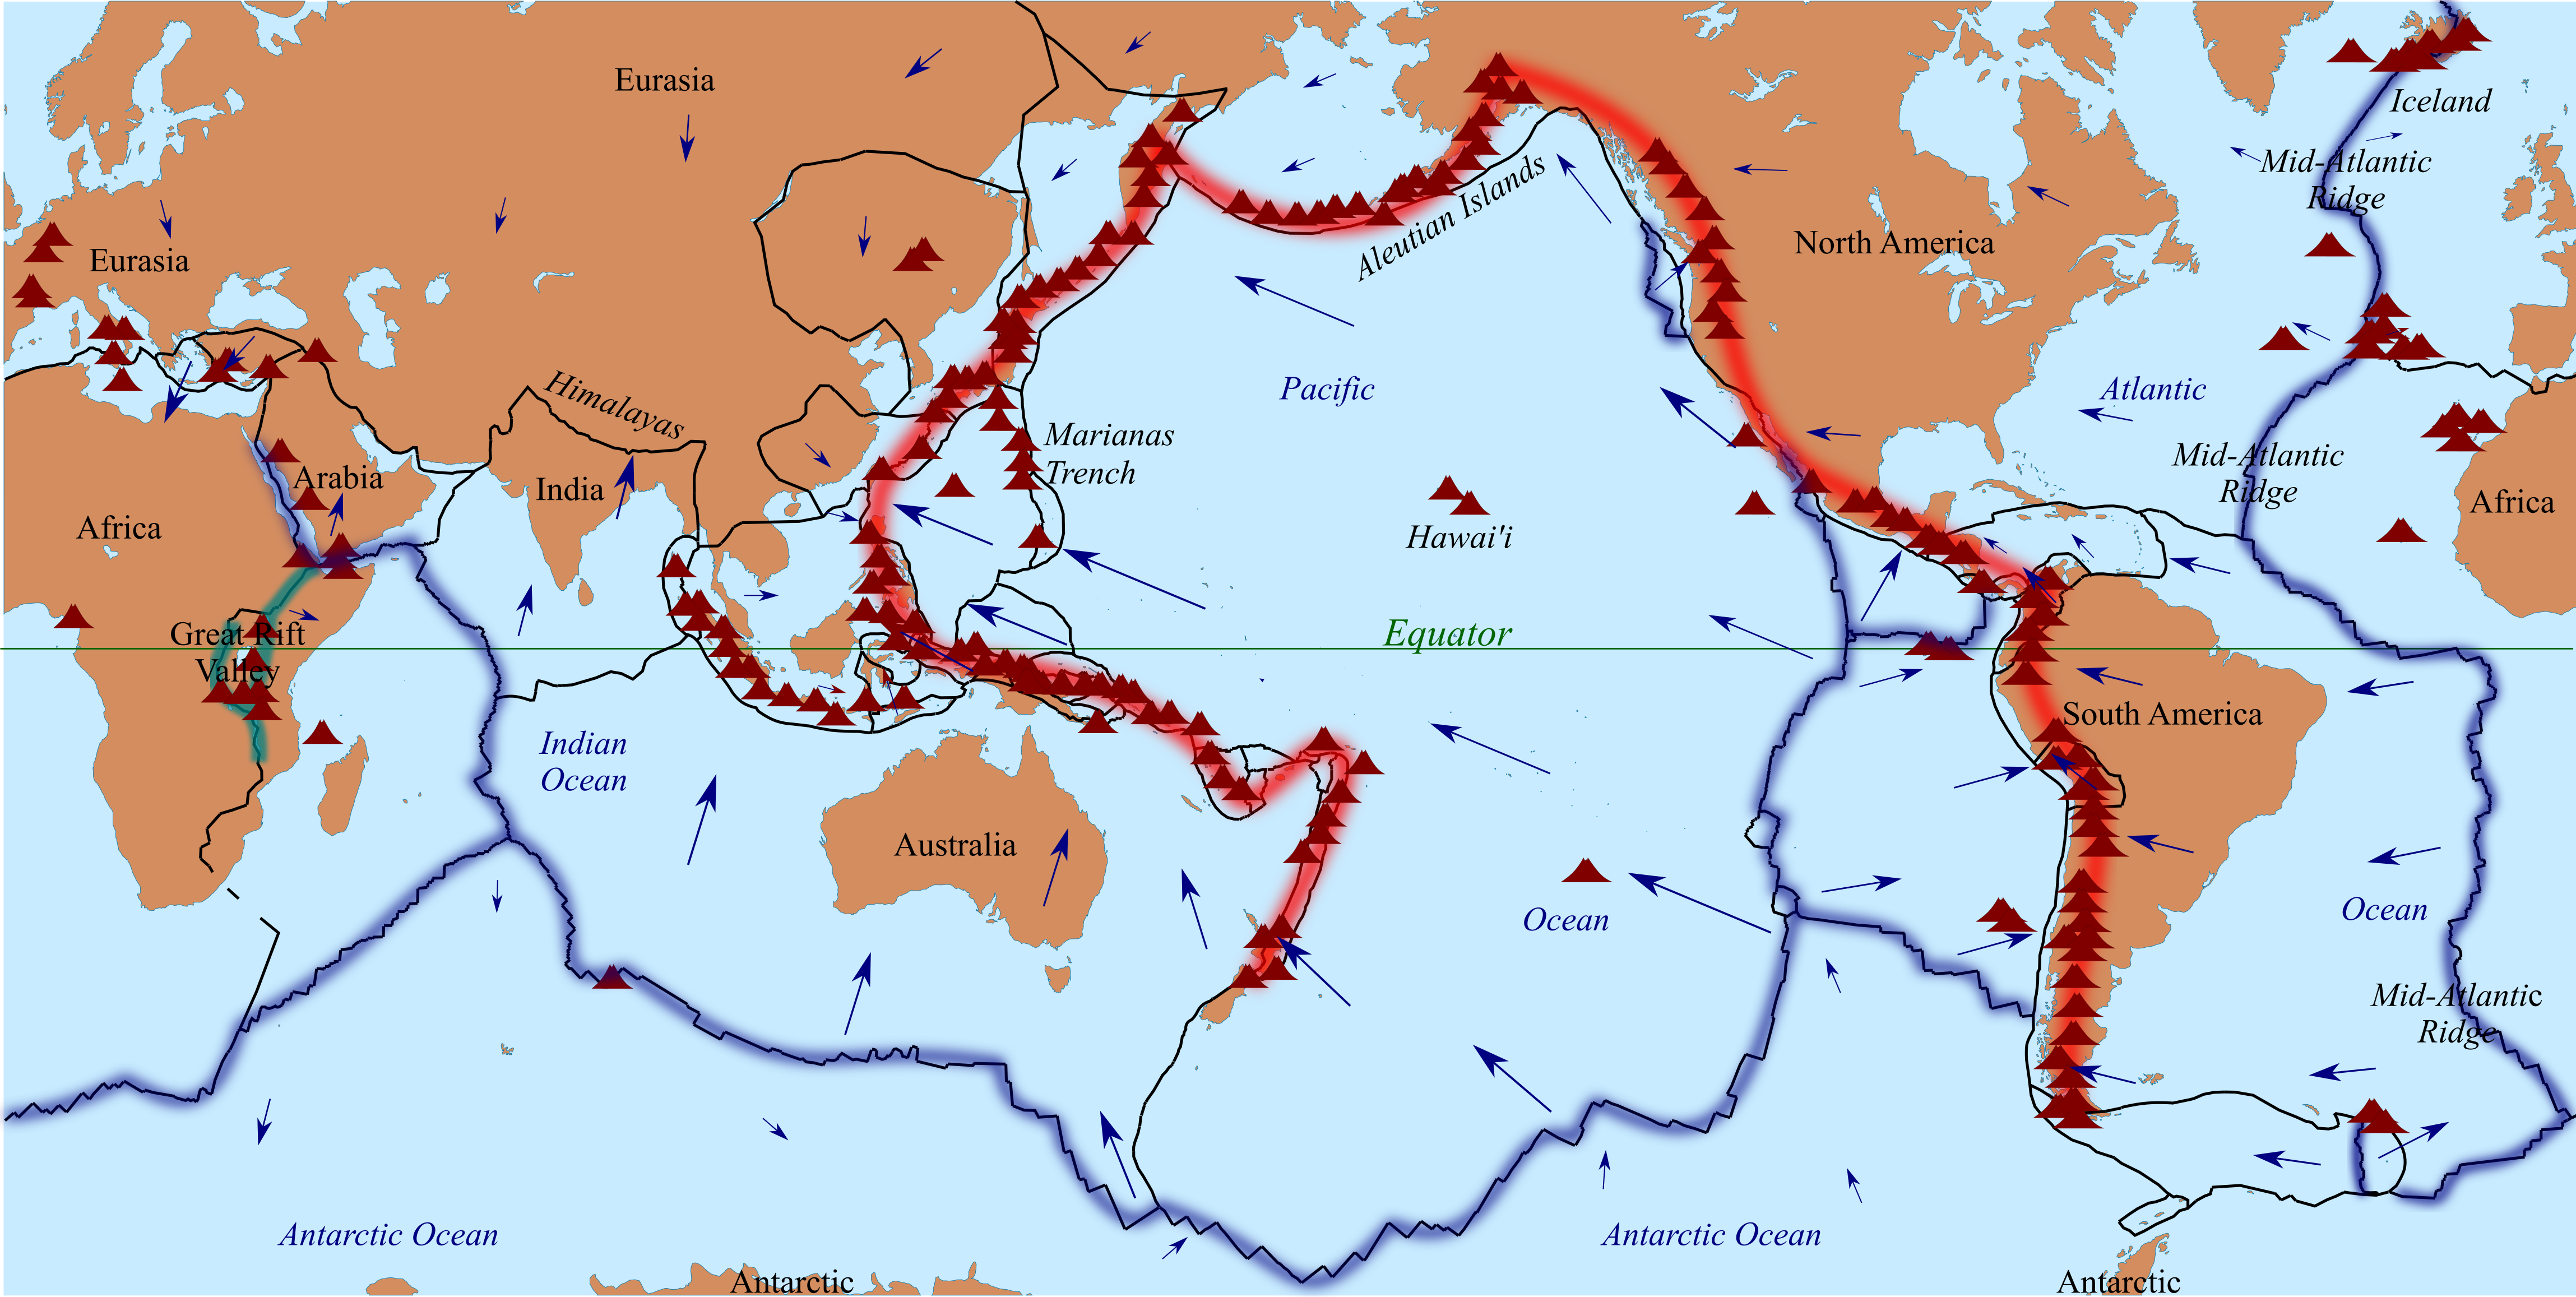 The Ring of Fire, where 90% of Earth's active volcanoes and earthquakes are found. https://commons.wikimedia.org/wiki/File:Tectonic_plates_and_ring_of_fire.png